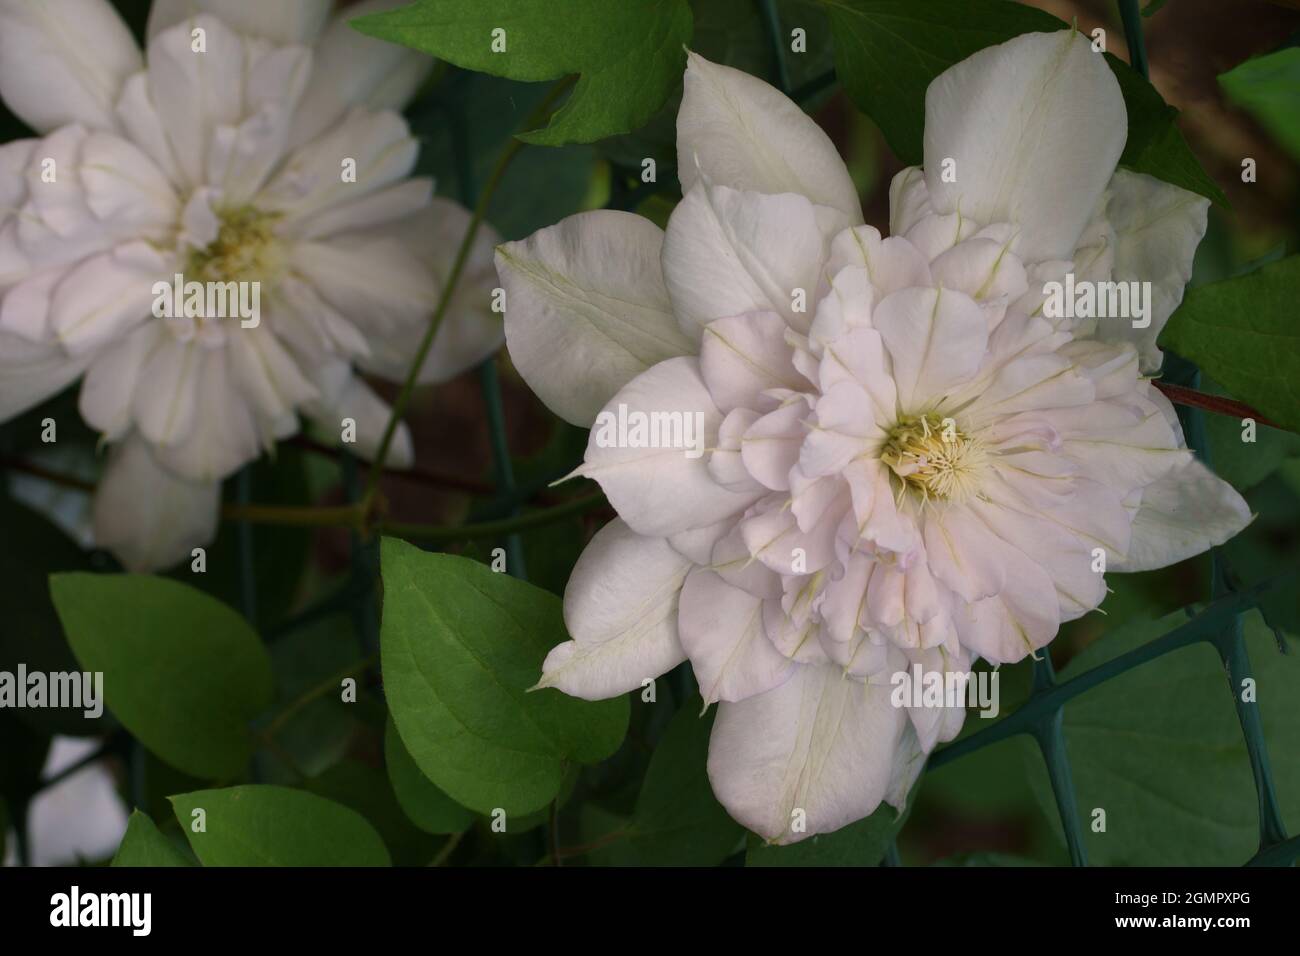 Flower double pink clematis close-up. Flower Clematis varieties Innocent Blush Stock Photo